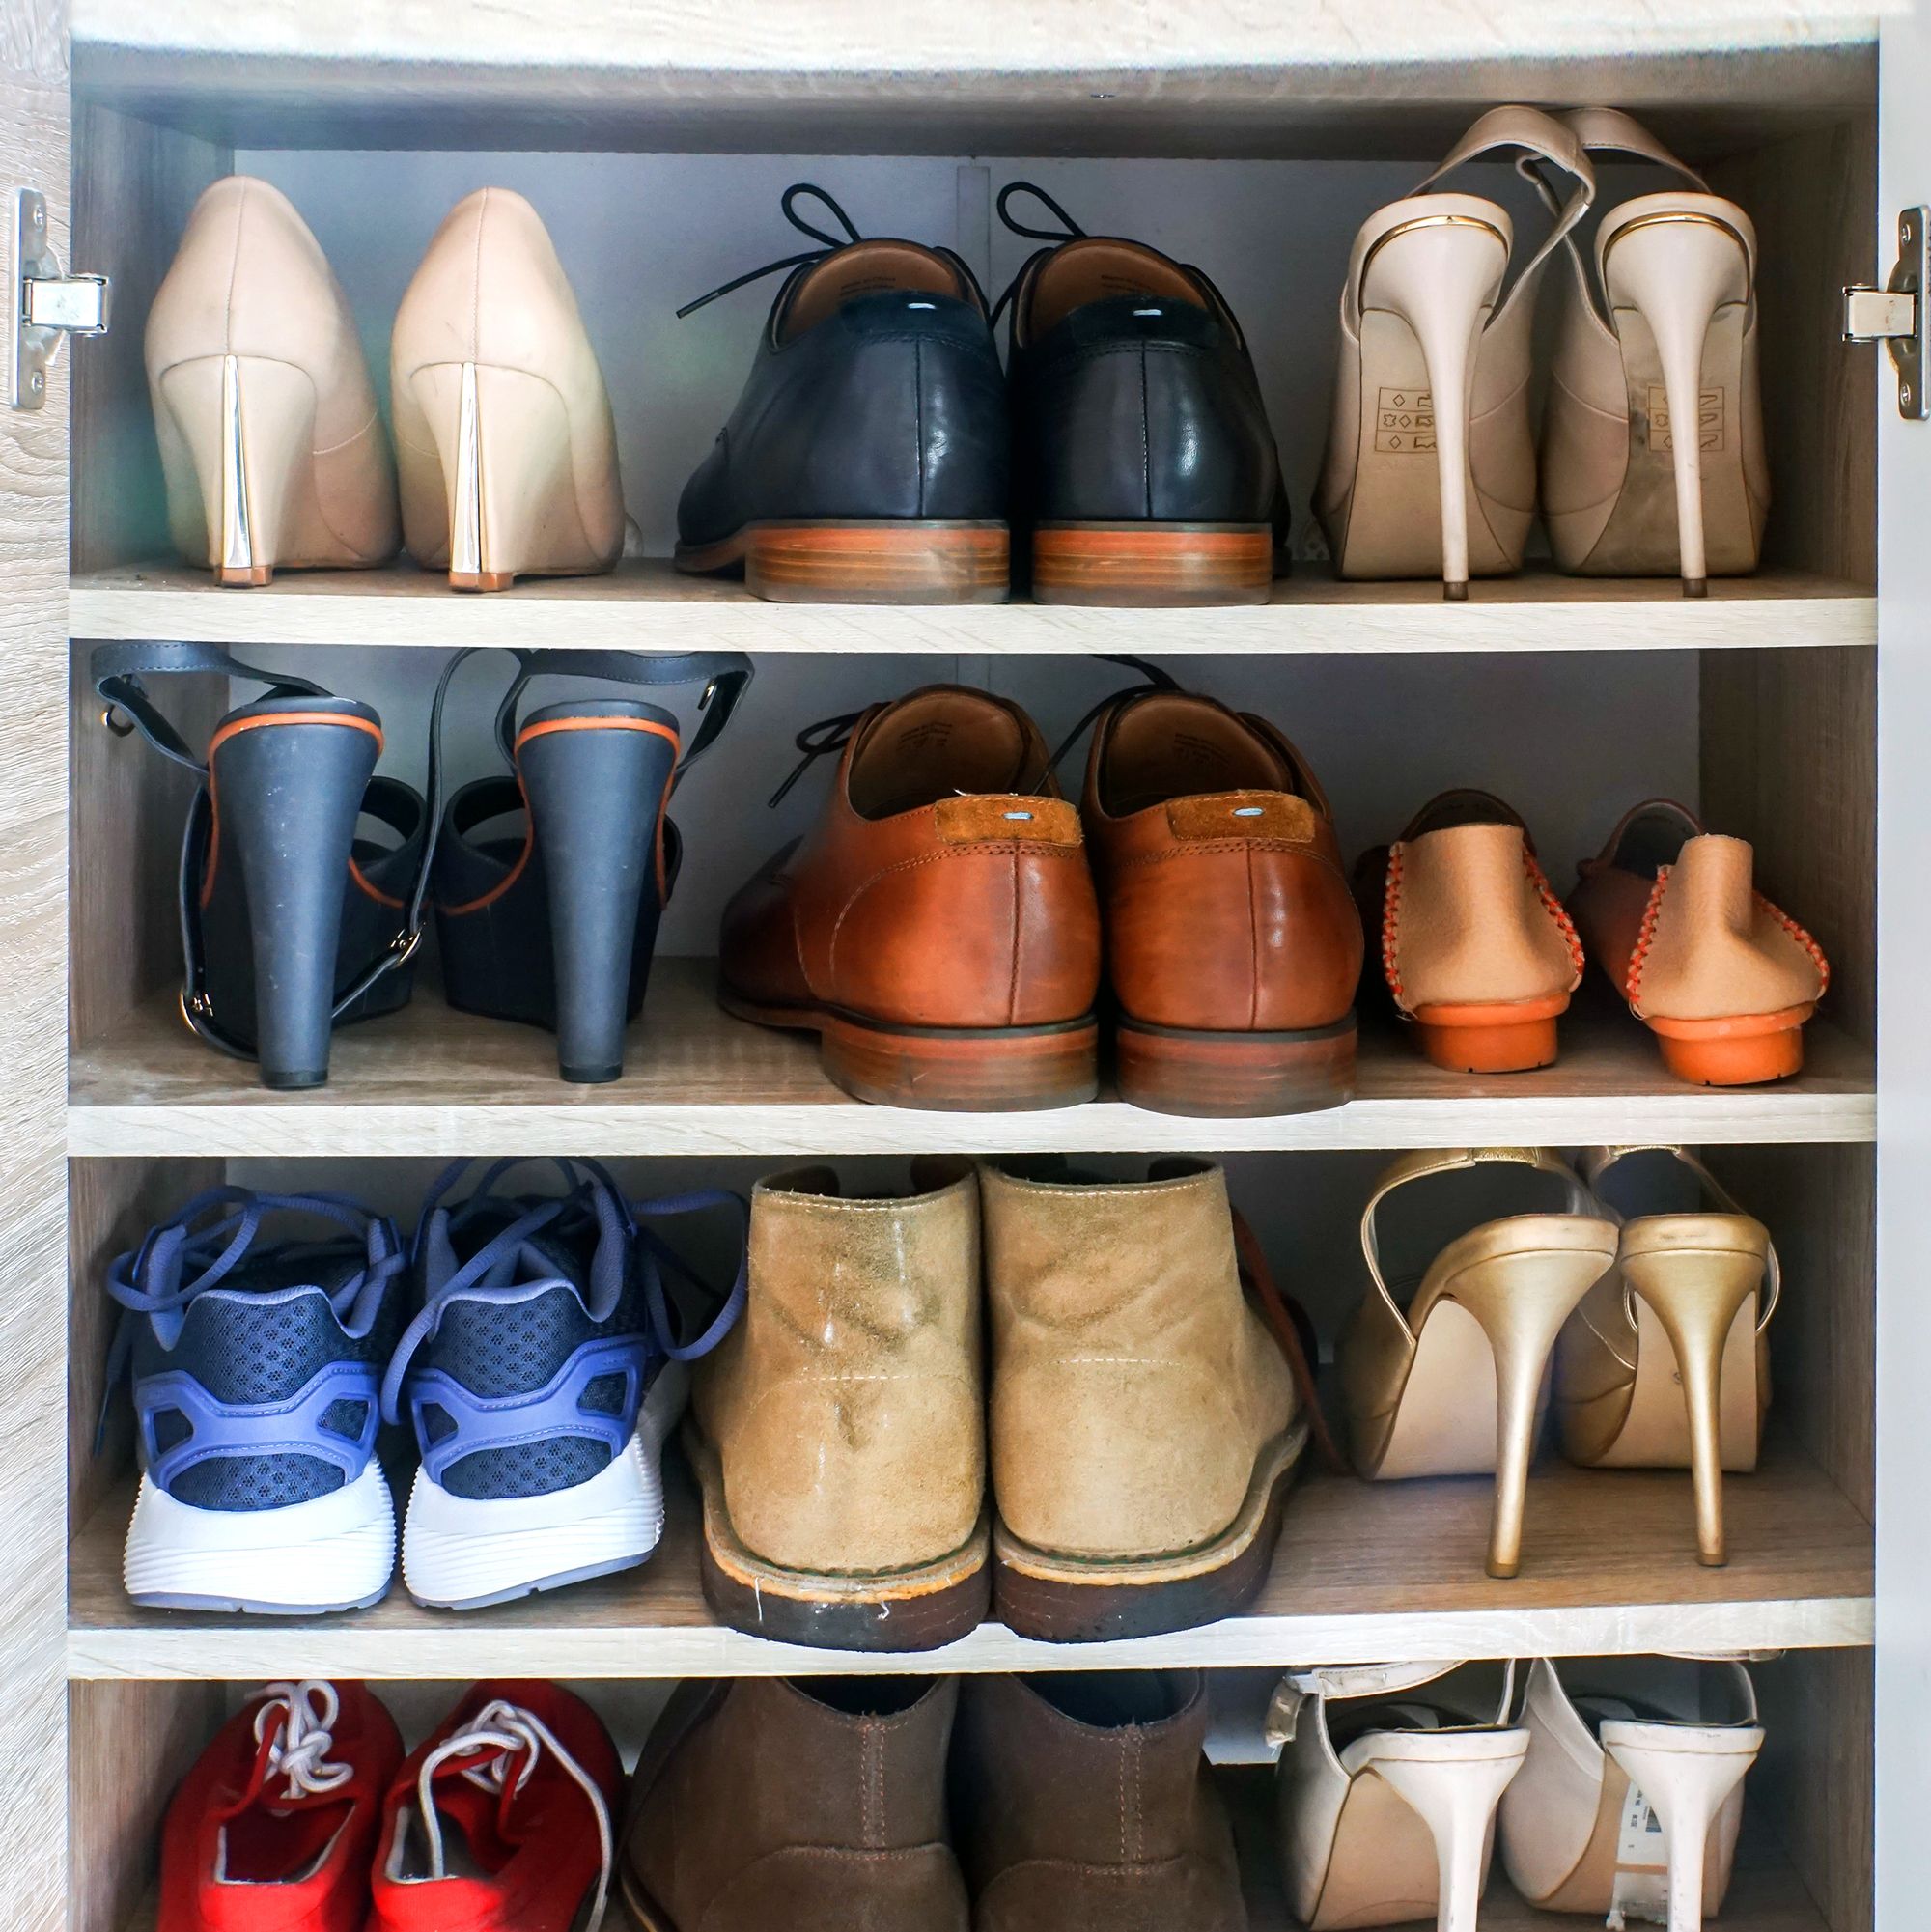 10 Best Shoe Cabinets With Doors - Foter